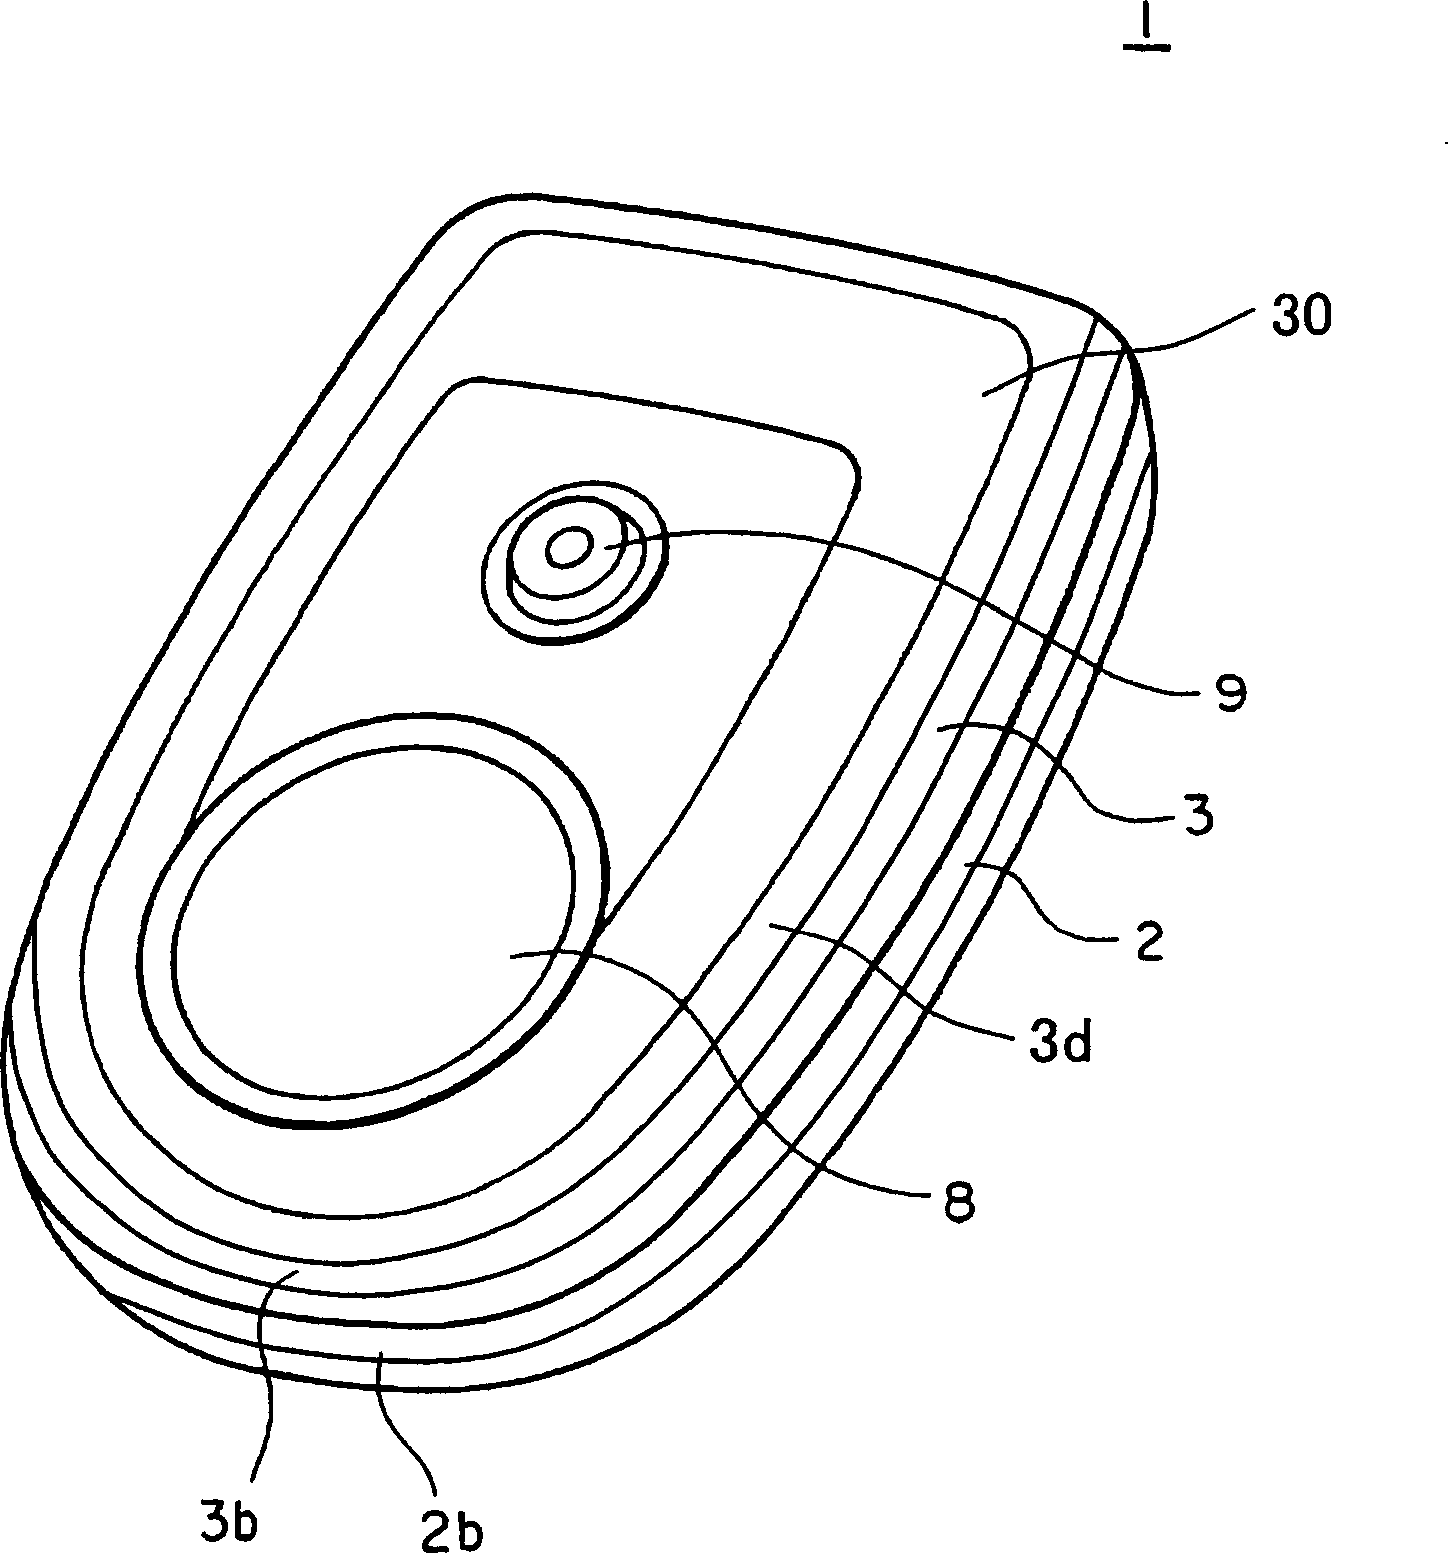 Acoustic device